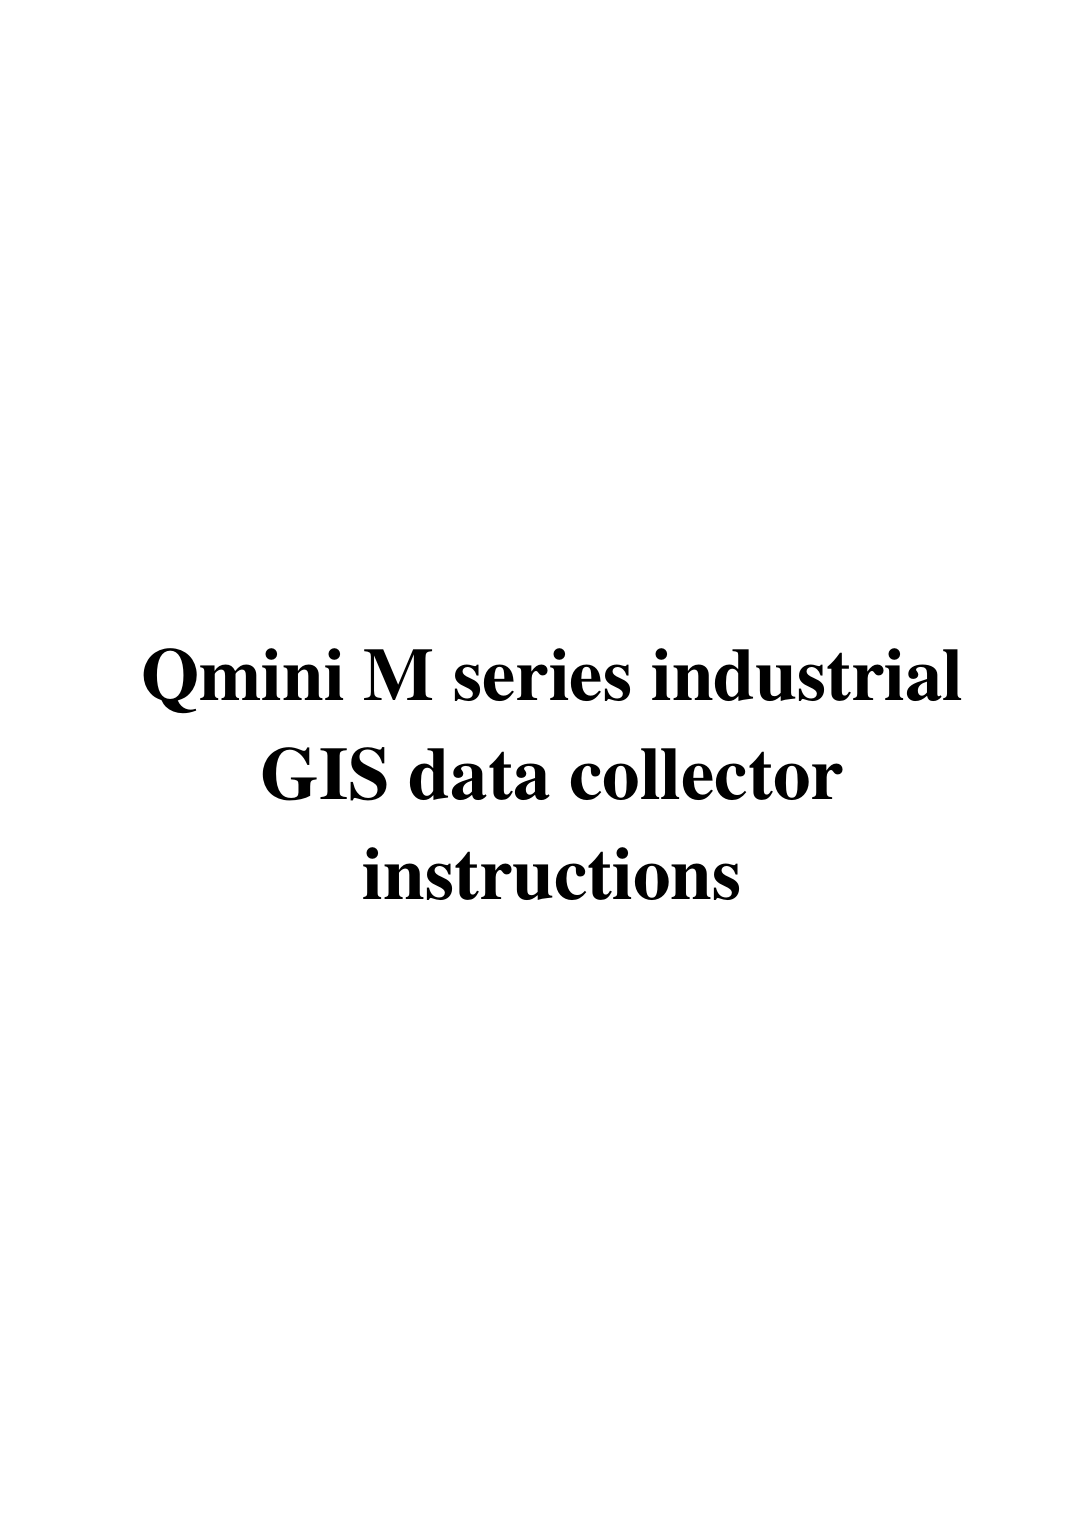       Qmini M series industrial GIS data collector instructions    